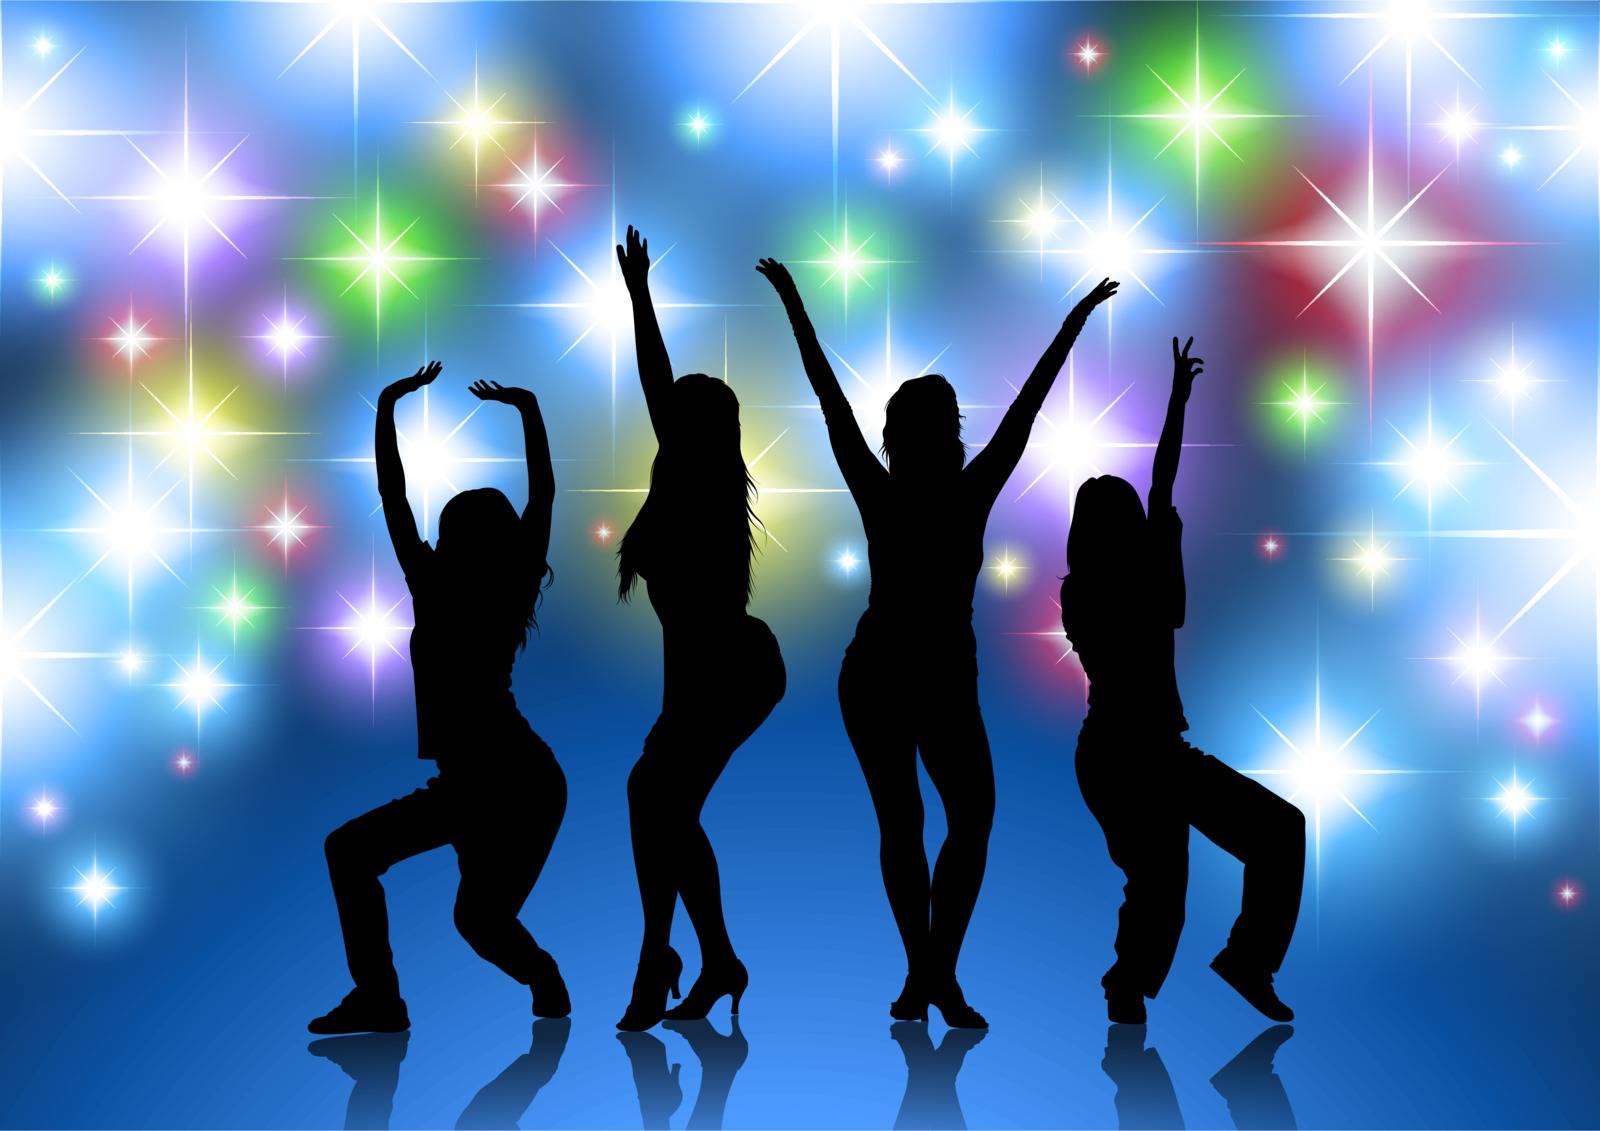 Amazing Party with Glowing Stars - Dance Background Illustration, Vector